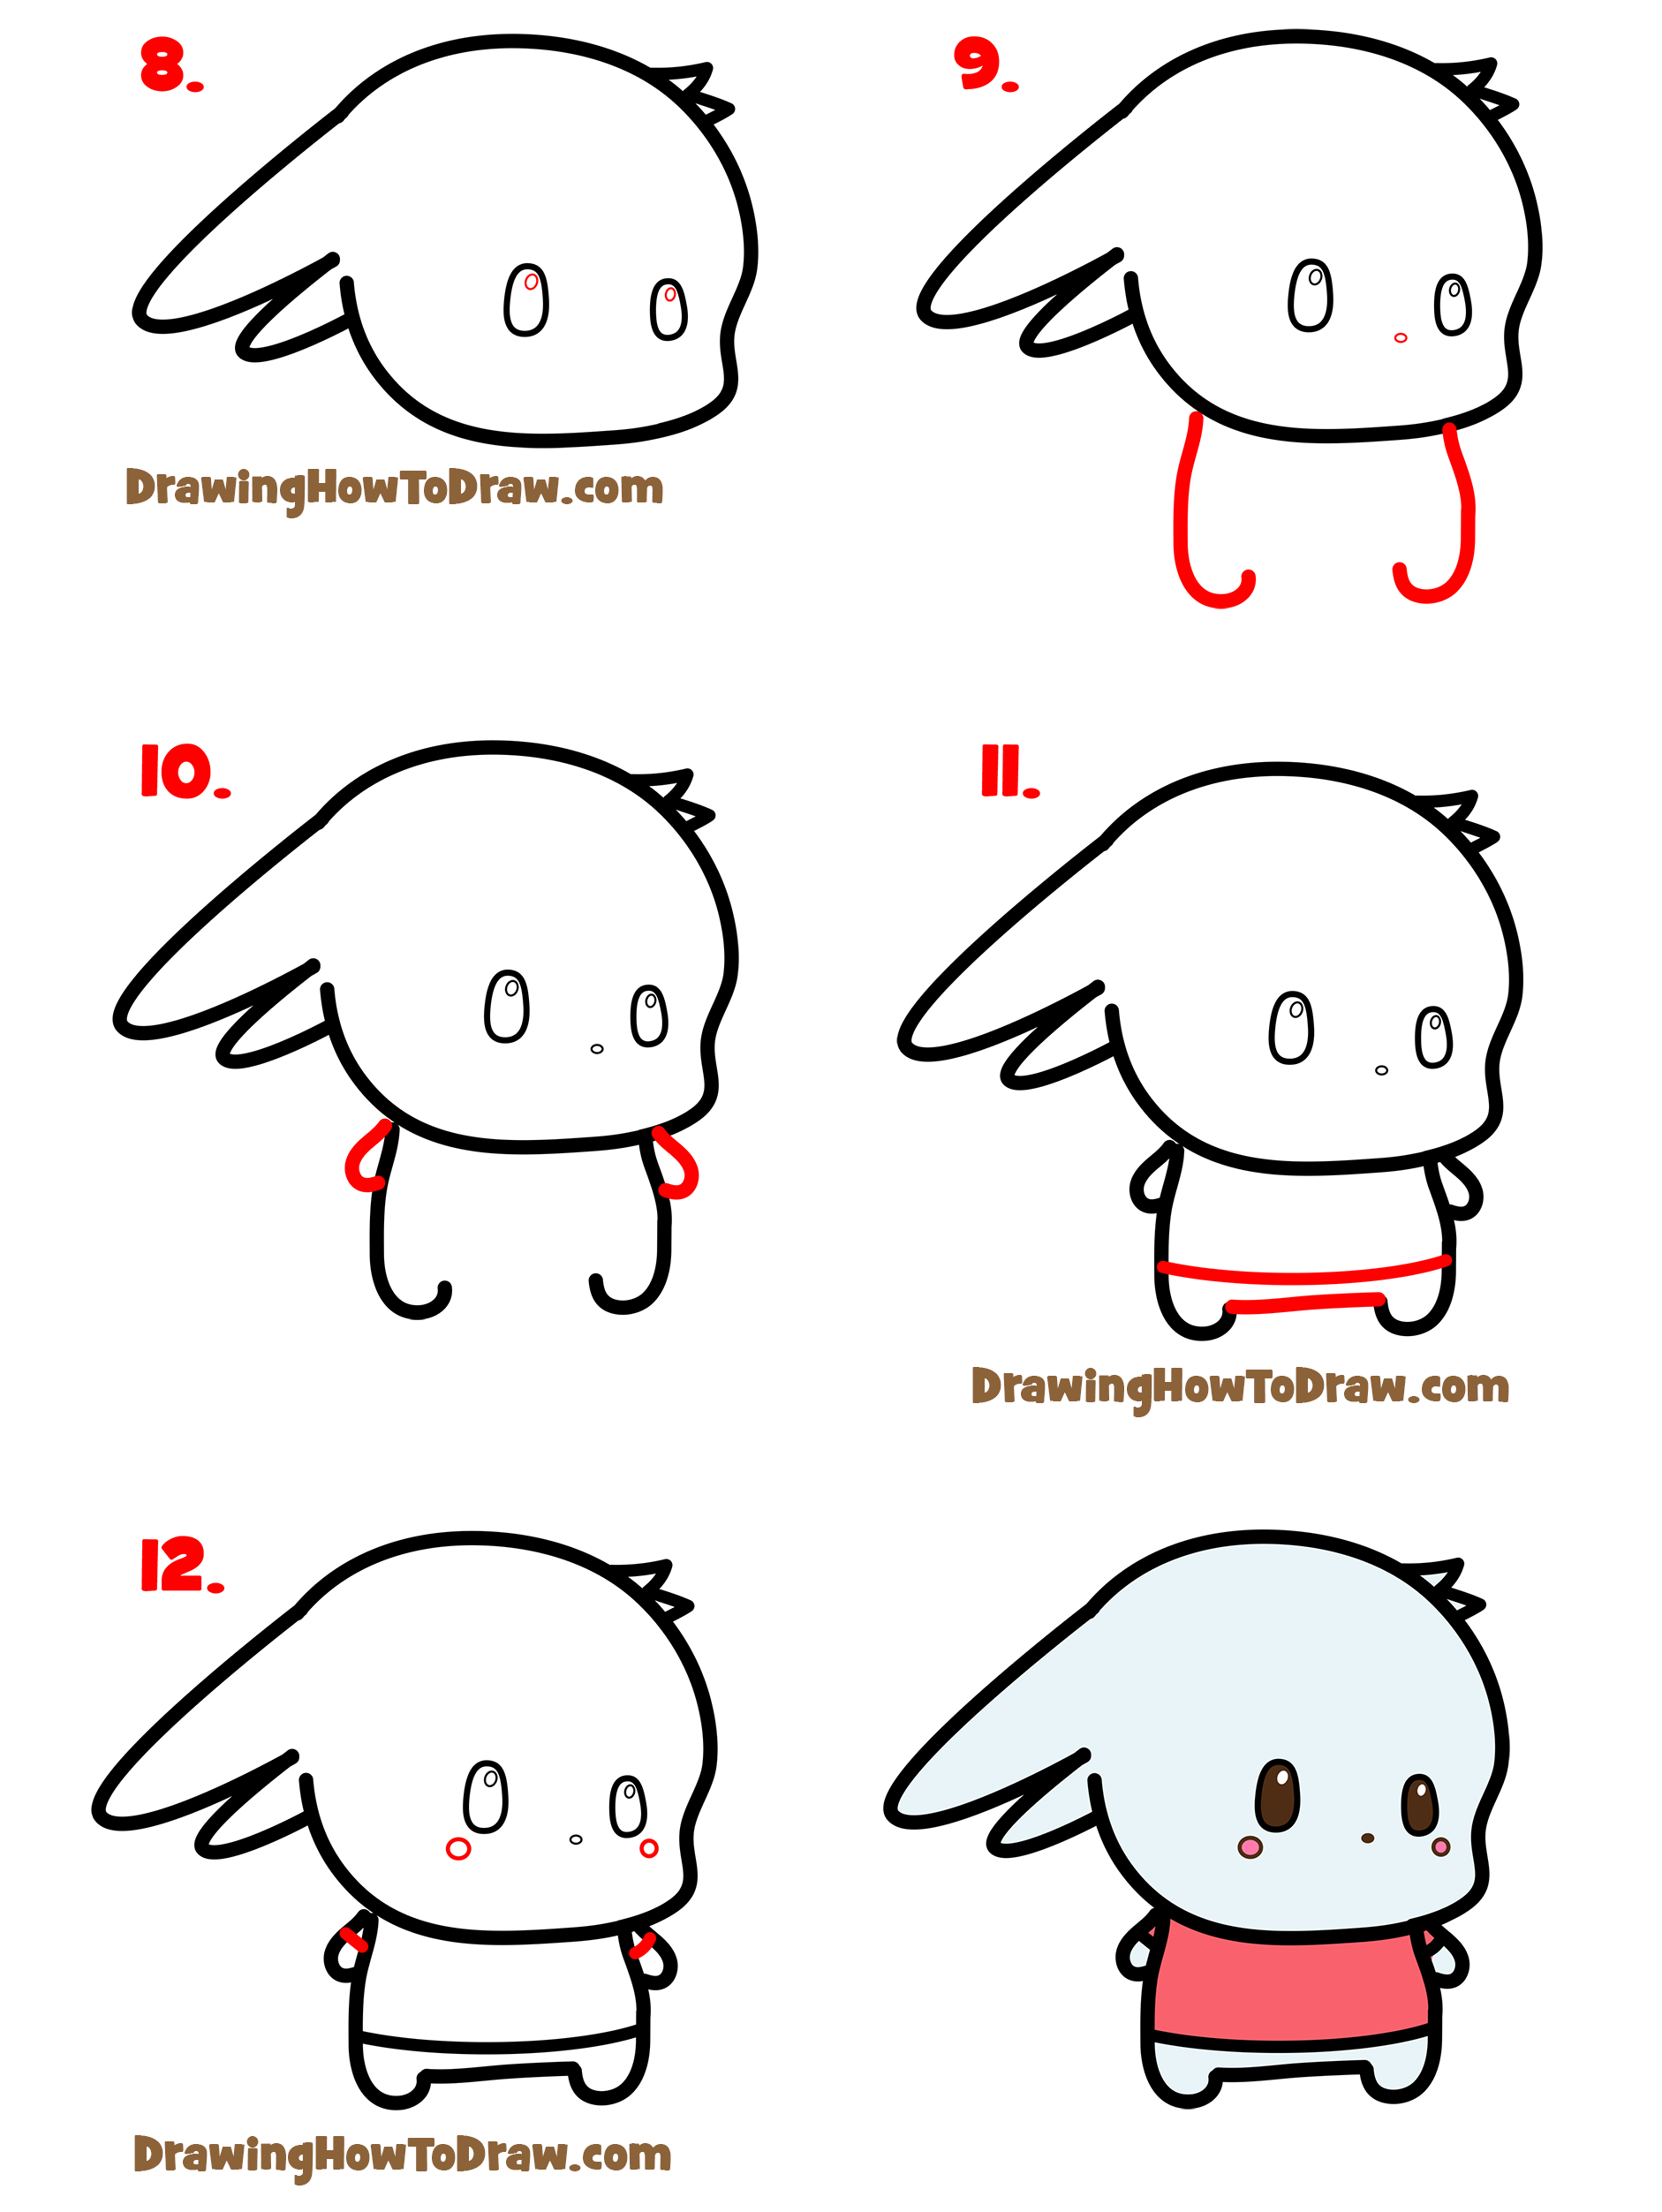 How to Draw a Cute Bunny Character (Kawaii / Chibi) Easy Step by Step Drawing Tutorial